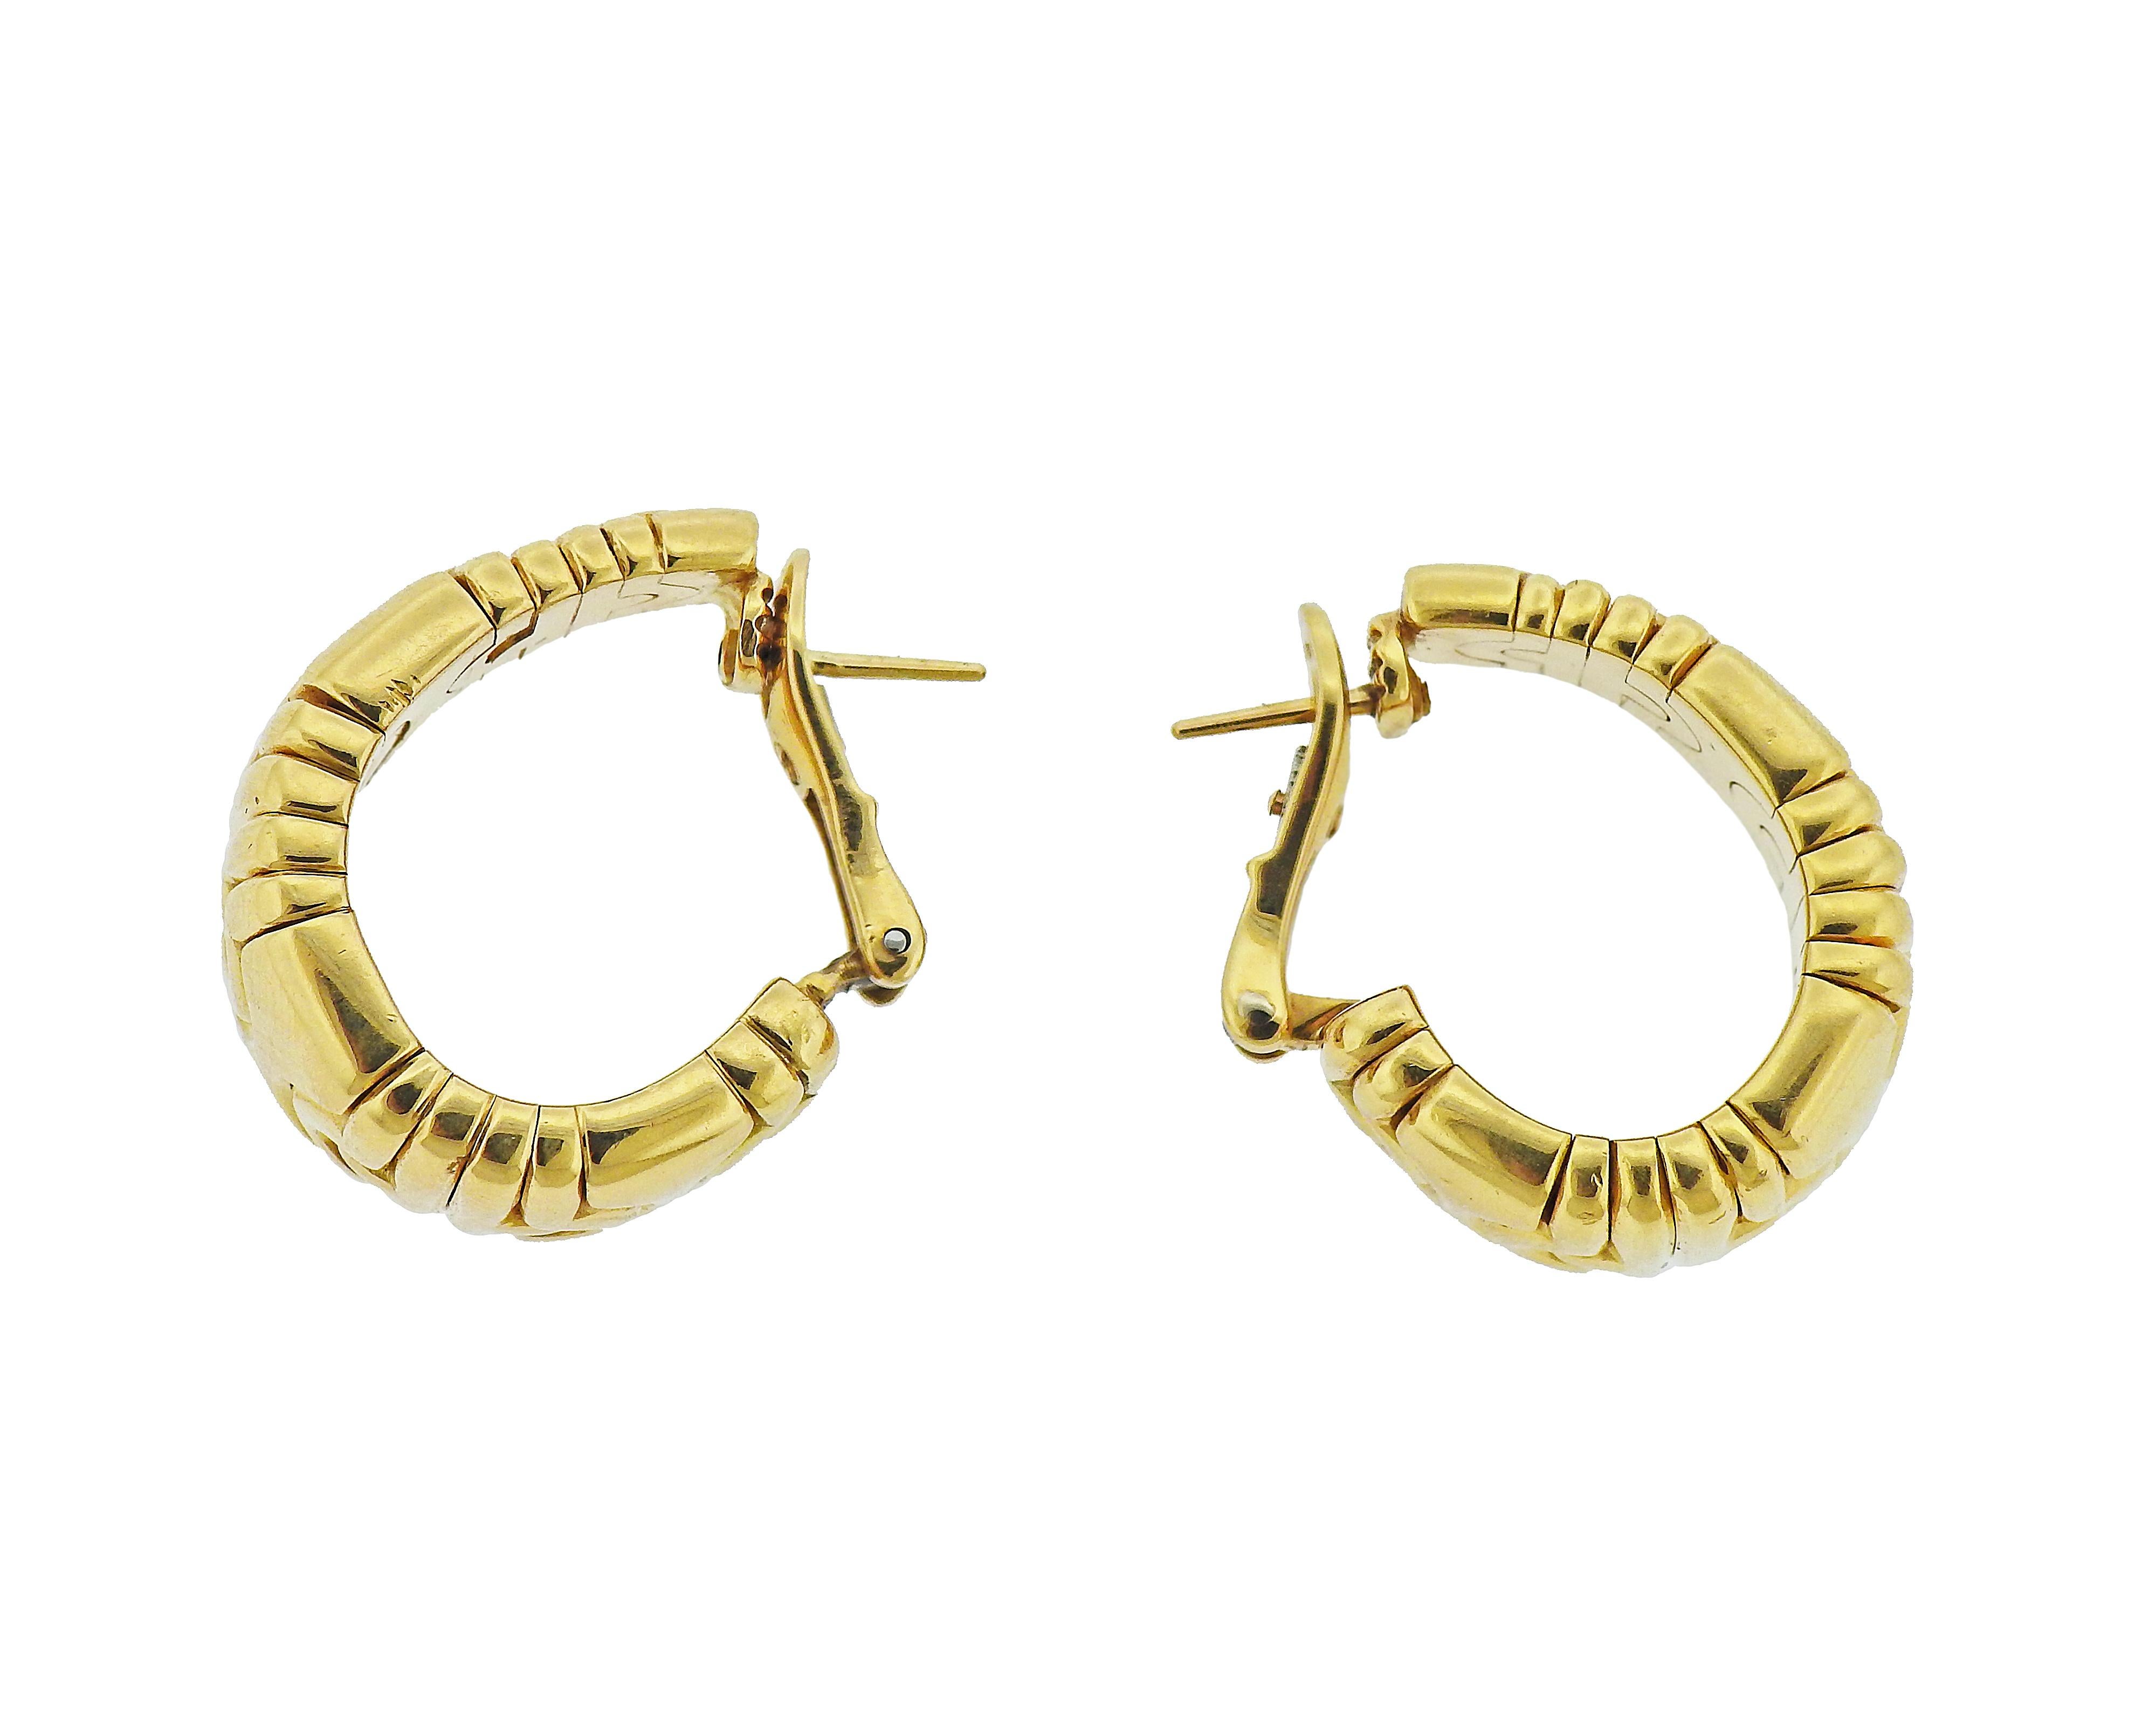 Pair of 18k yellow gold Parentesi hoop earrings by Bvlgari. Earrings are 26mm x 15mm wide. Marked: Bvlgari, made in Italy, 750. Weight - 47.4 grams.